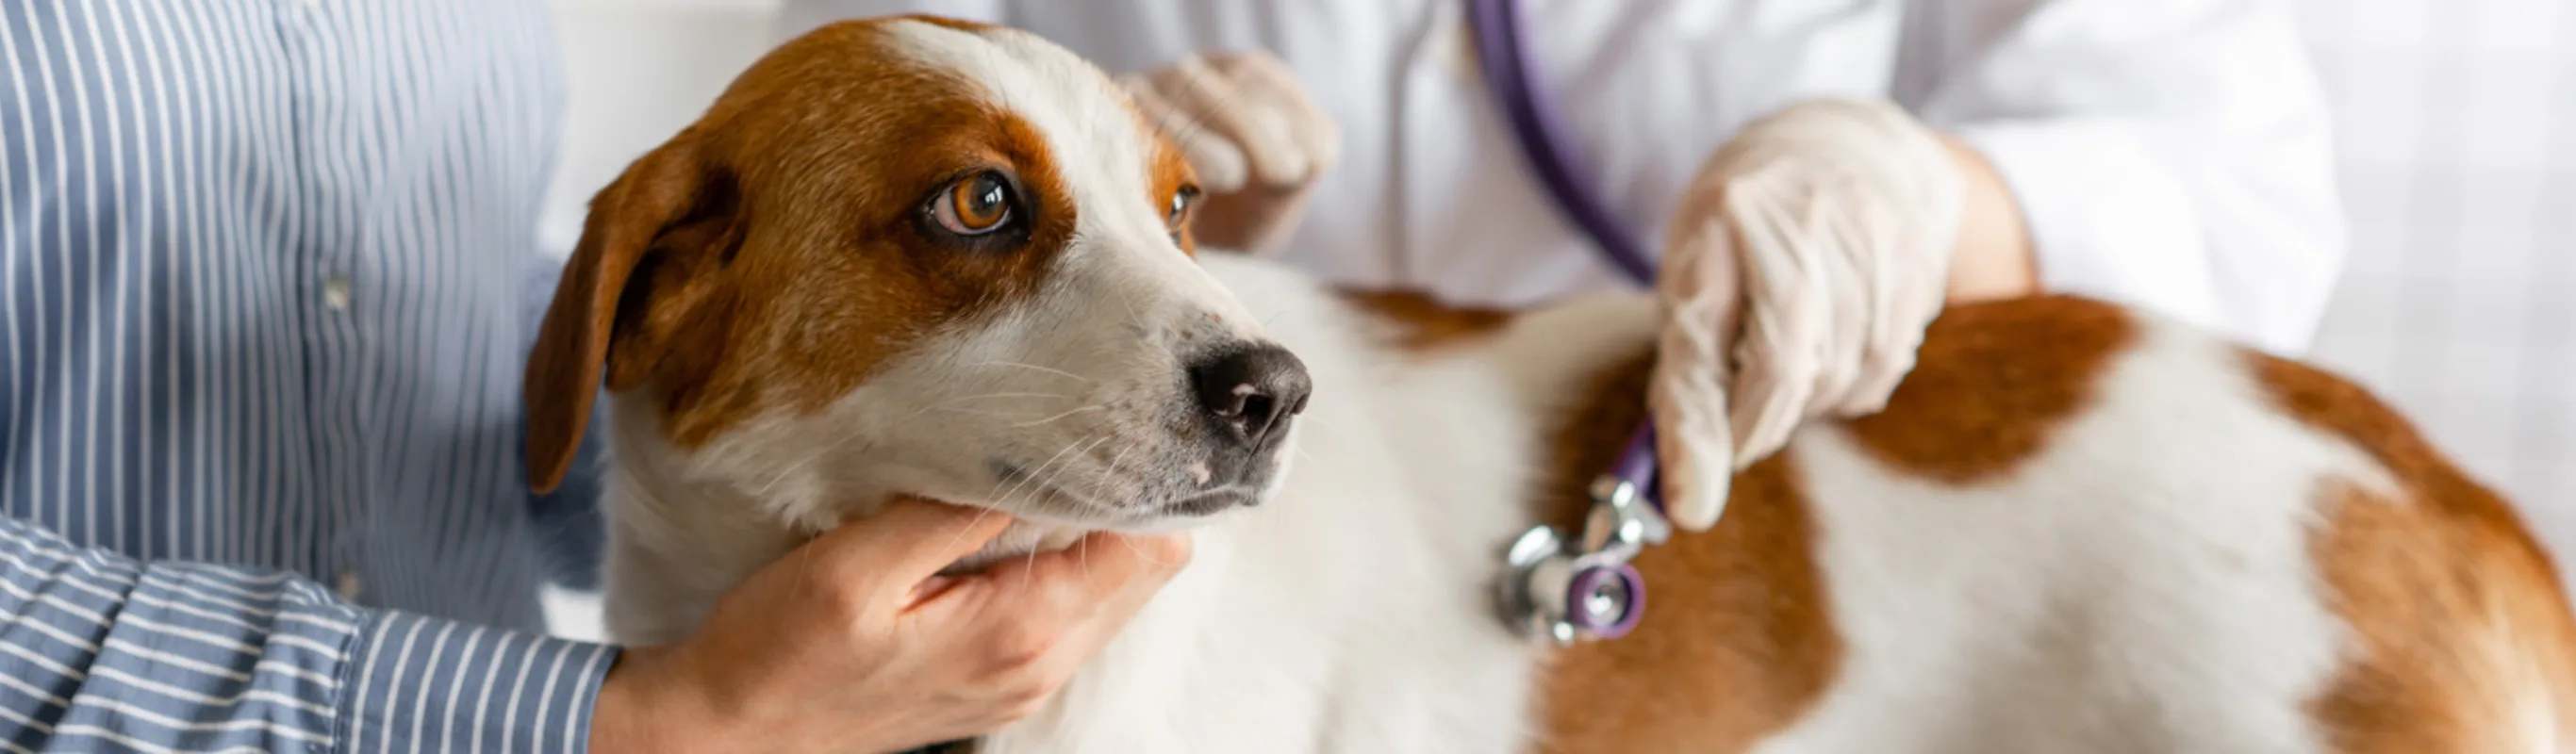 Medium white and brown dog being examined by a veterinarian with a stethoscope